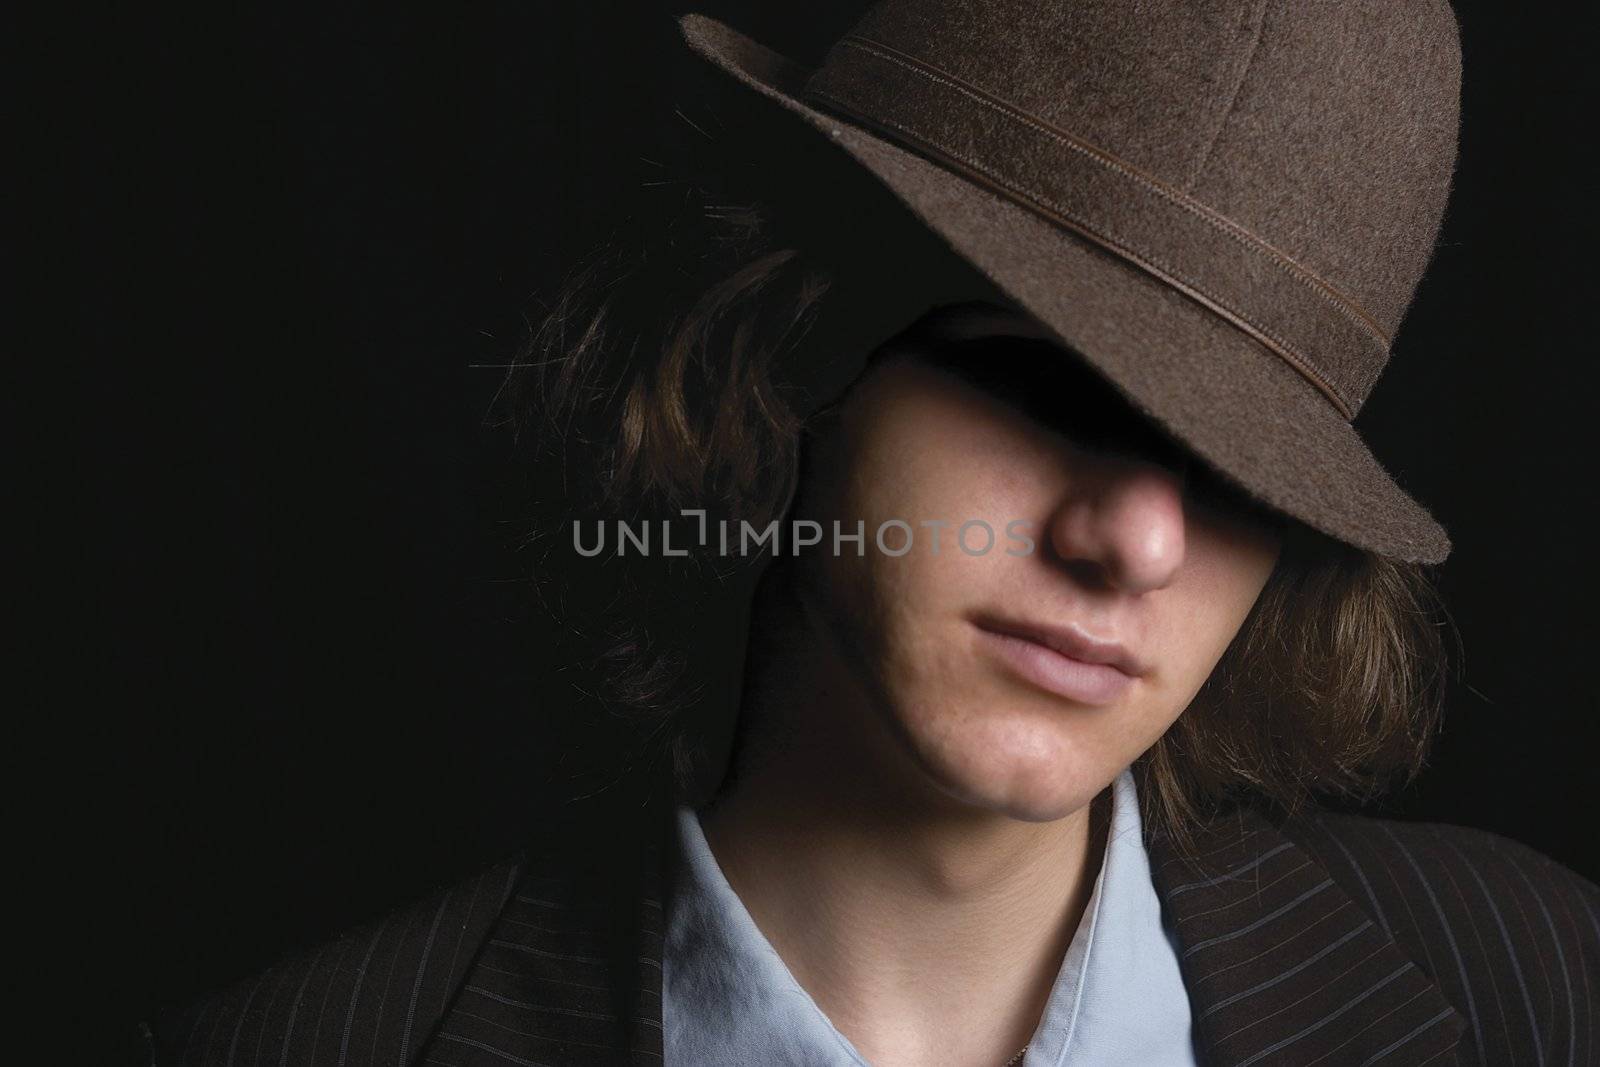 Young man faces partly hidden by hat